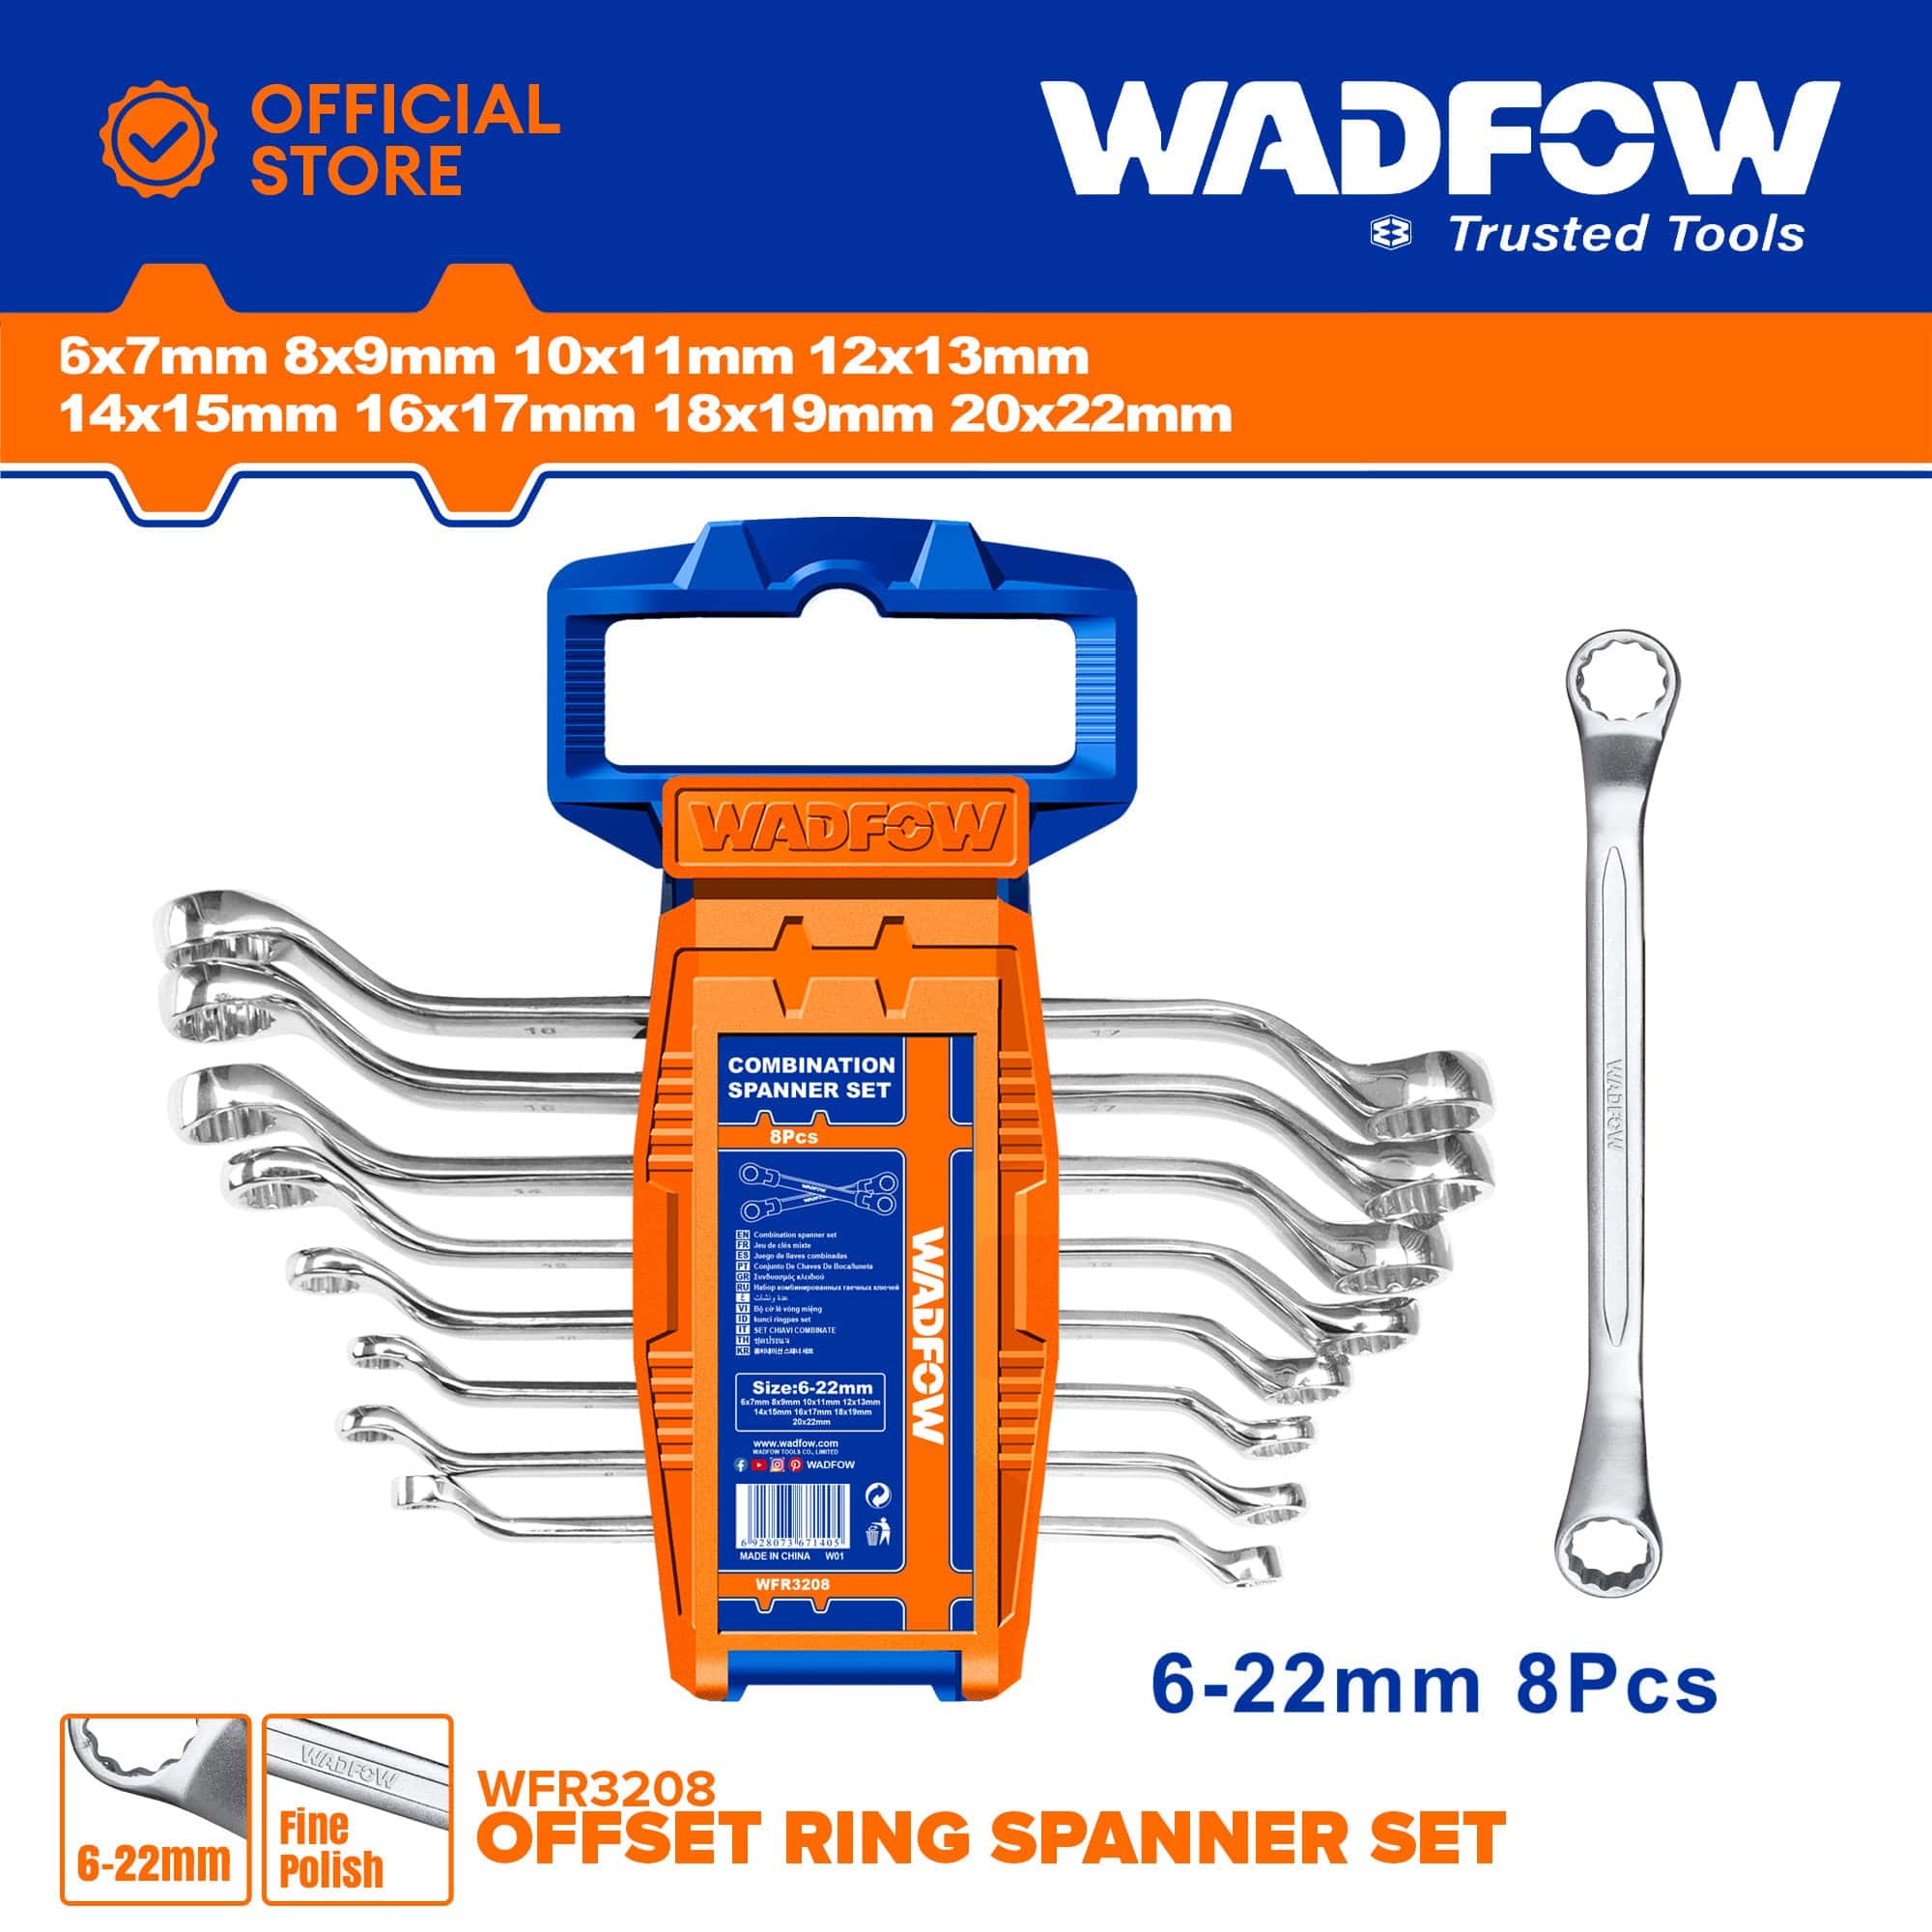 Buy Wadfow 8 Pieces Offset Ring Spanner Set (WFR3208) in Accra, Ghana | Supply Master Wrenches Buy Tools hardware Building materials